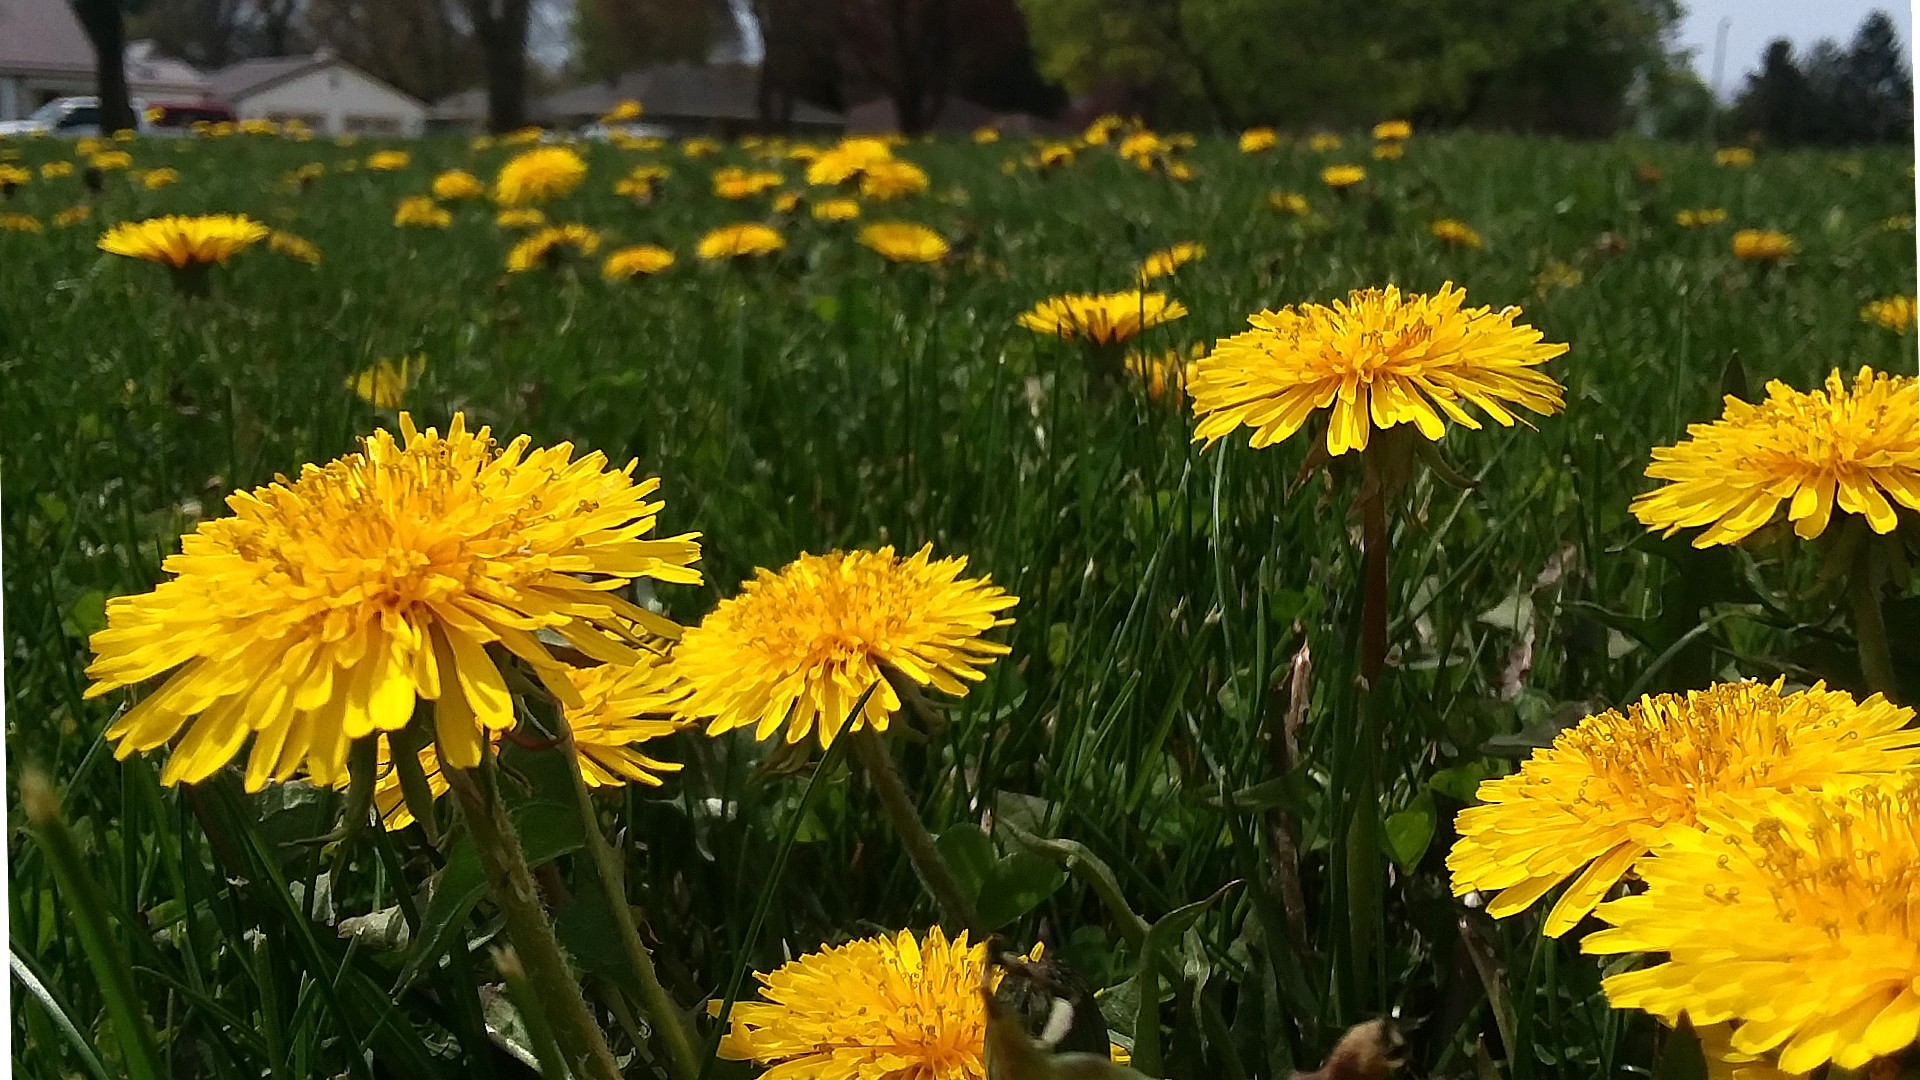 Dandelion's available for pollinators during No Mo May. Dan Plutchak photo.